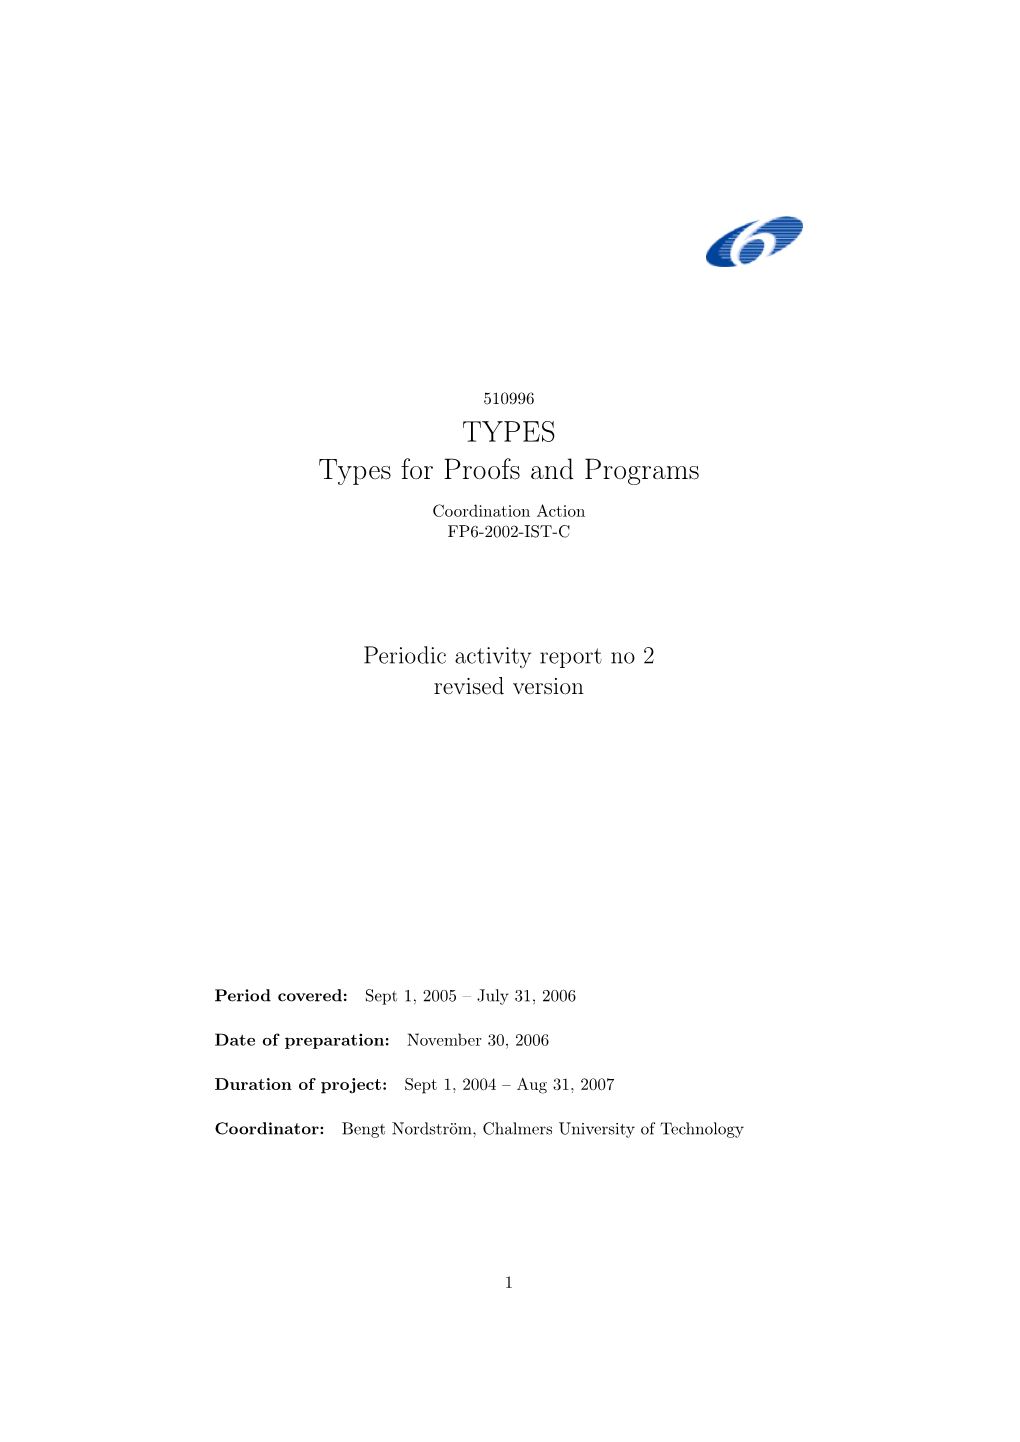 TYPES Types for Proofs and Programs